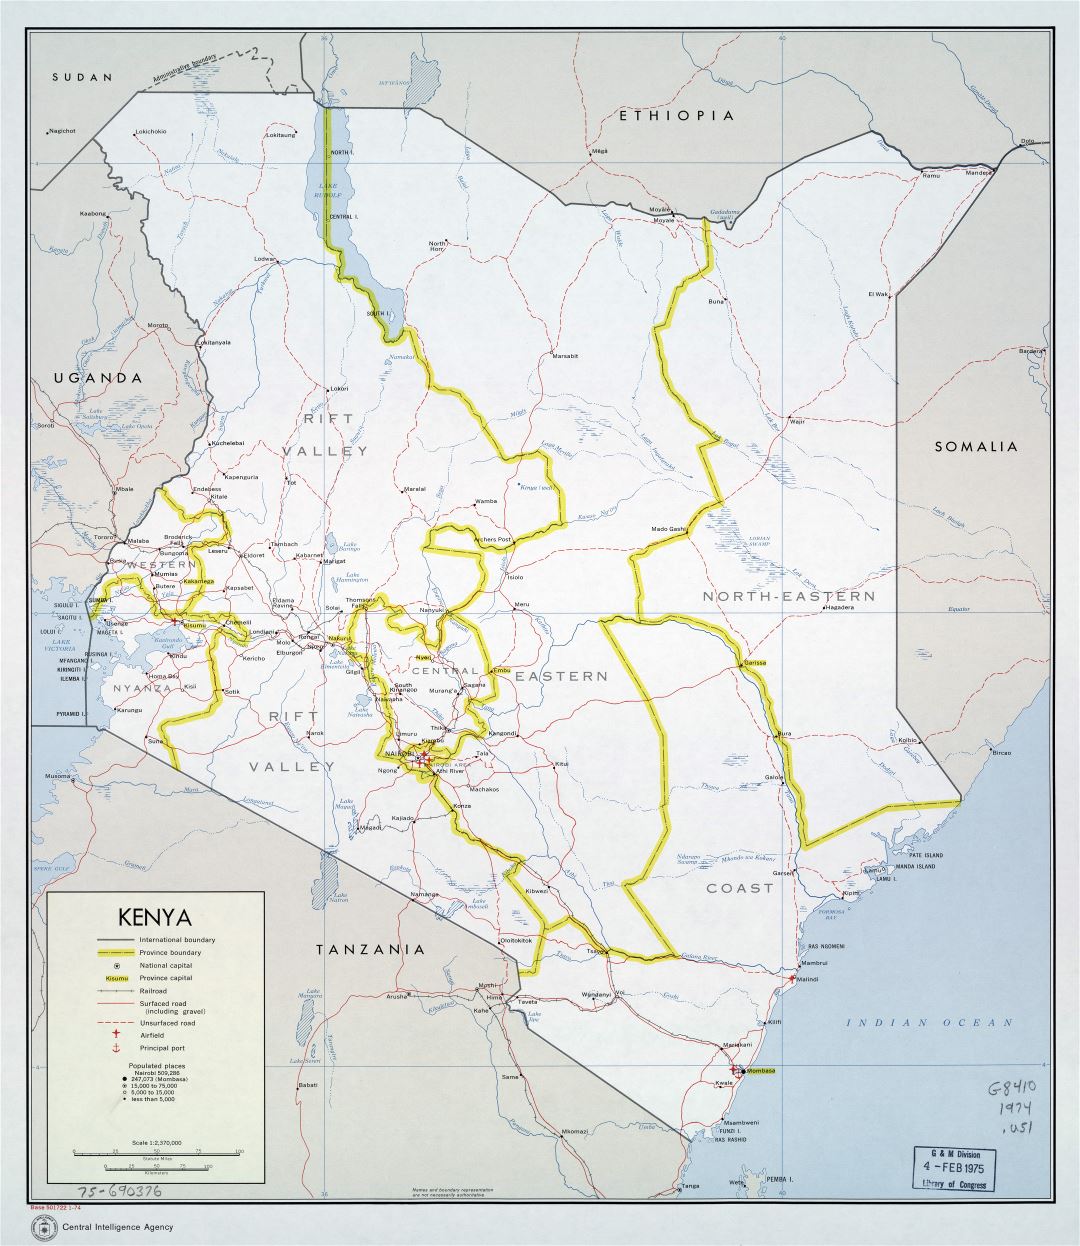 Large scale political and administrative map of Kenya with roads, railroads, cities, ports and airports - 1974